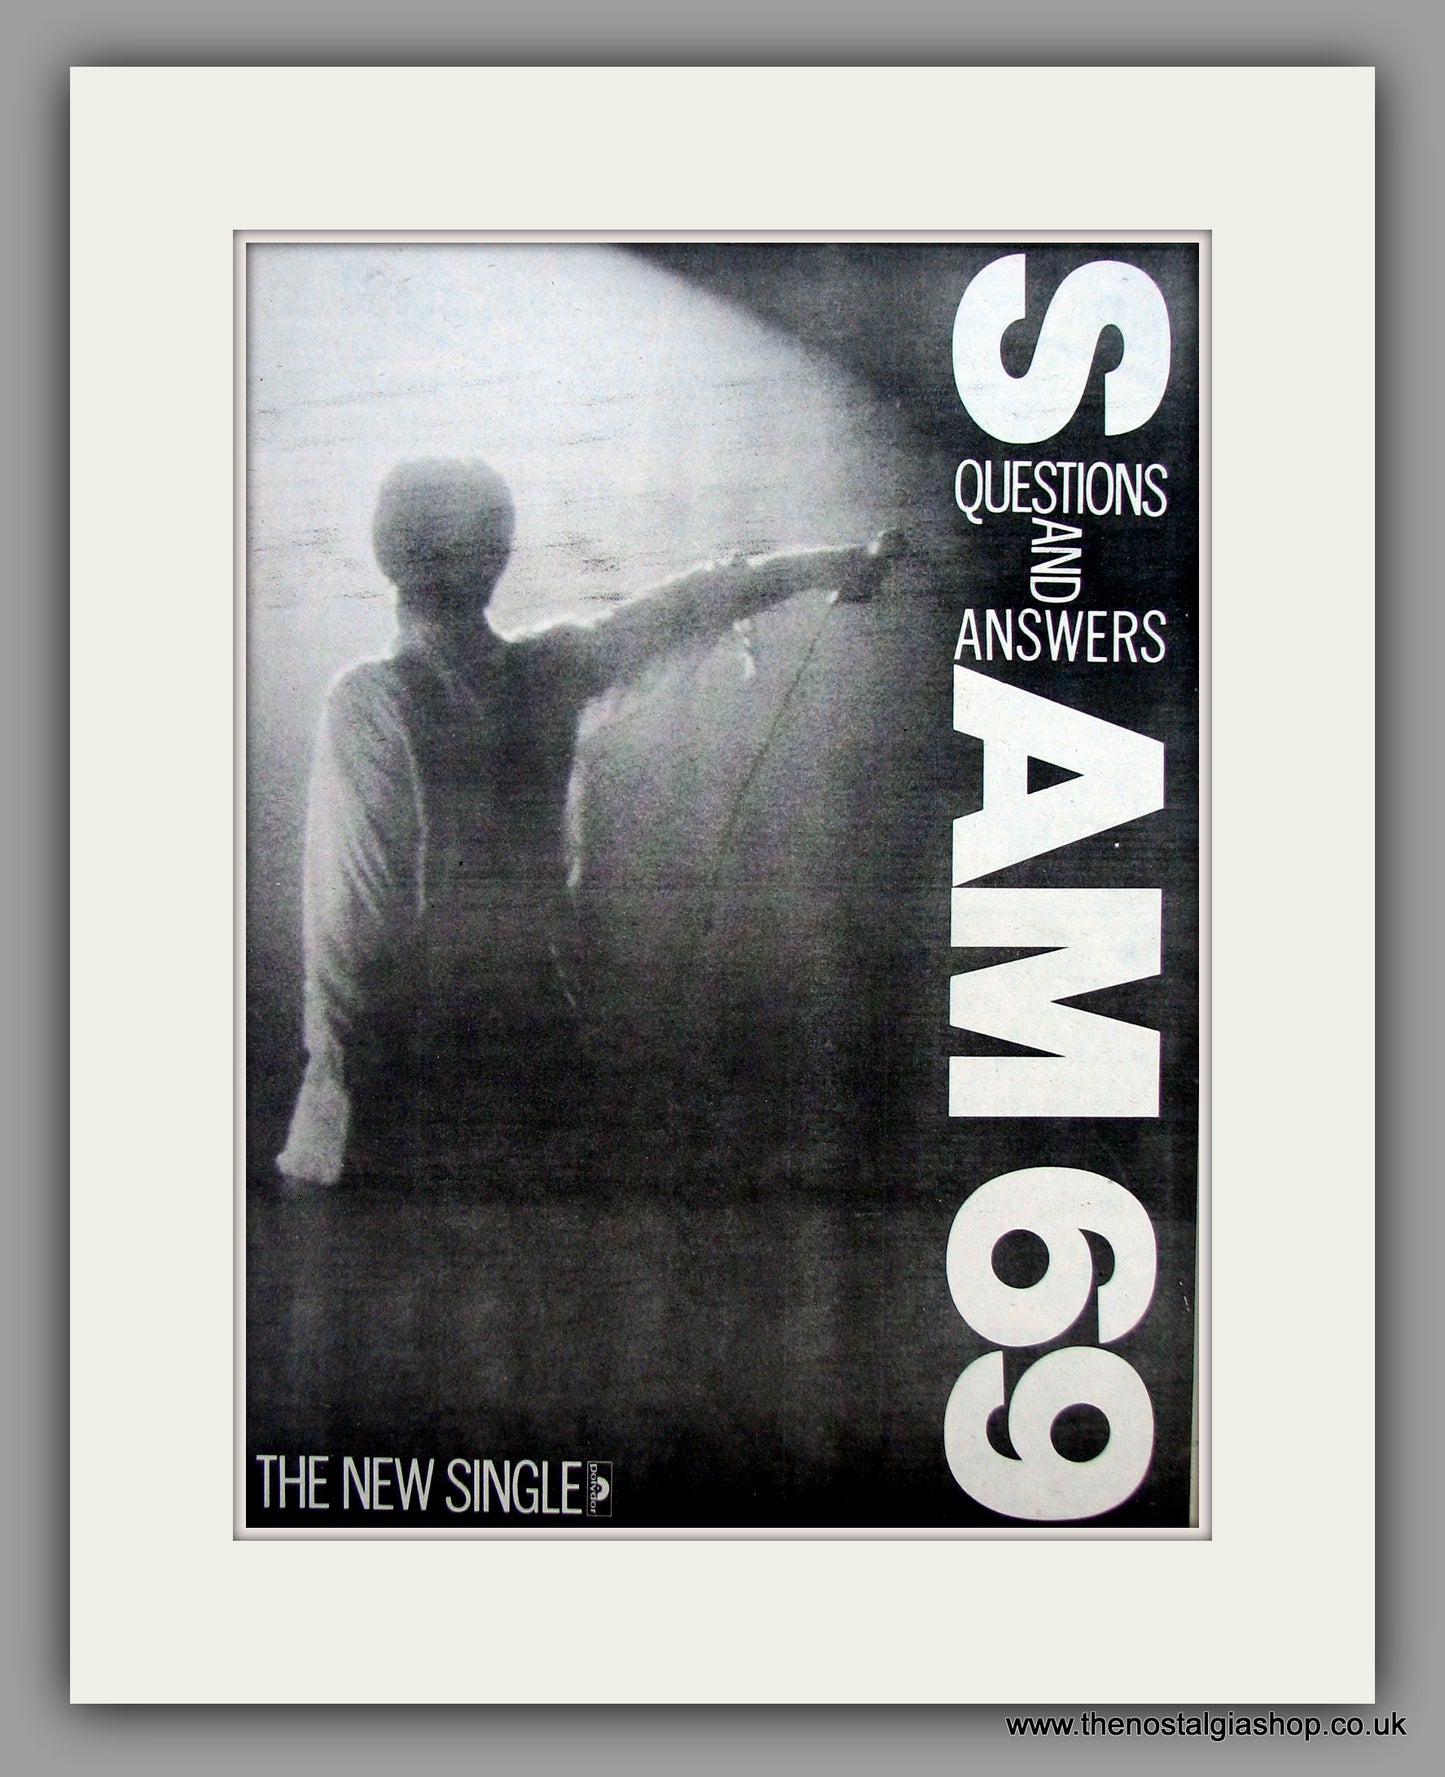 Sham 69-Questions And Answers.  Original Vintage Advert 1979 (ref AD10502)